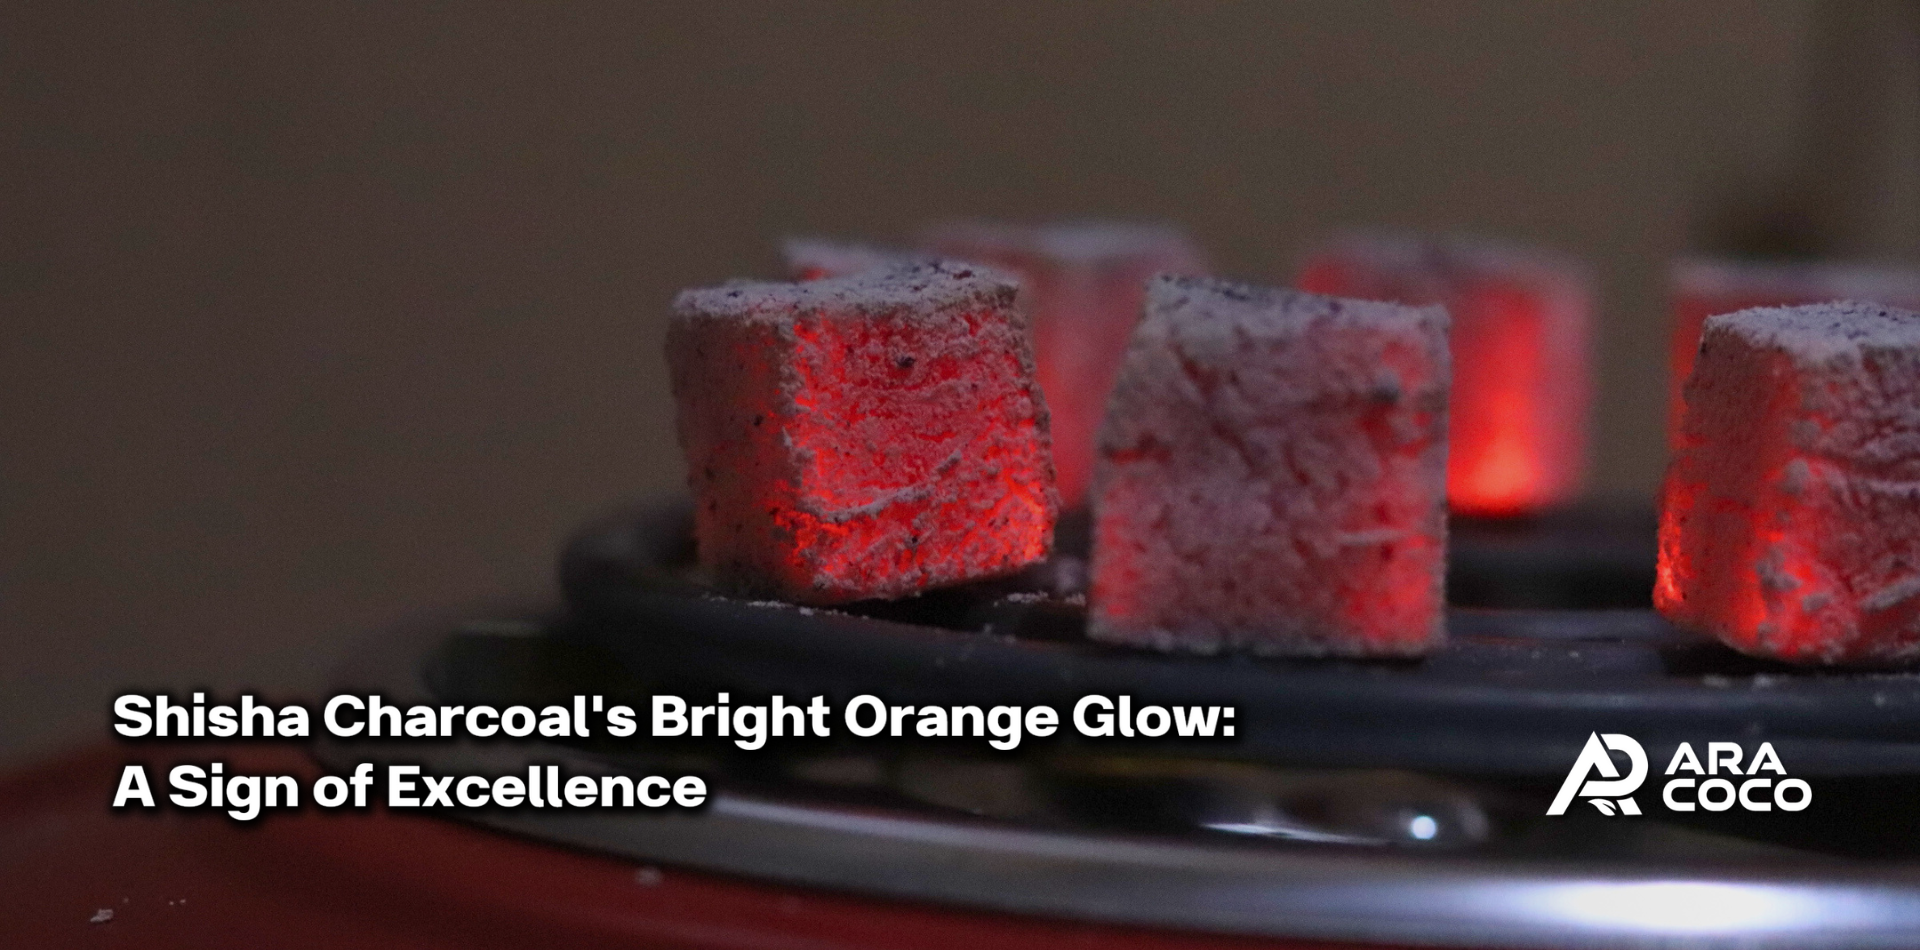 Shisha Charcoal's Bright Orange Glow: A Sign of Excellence